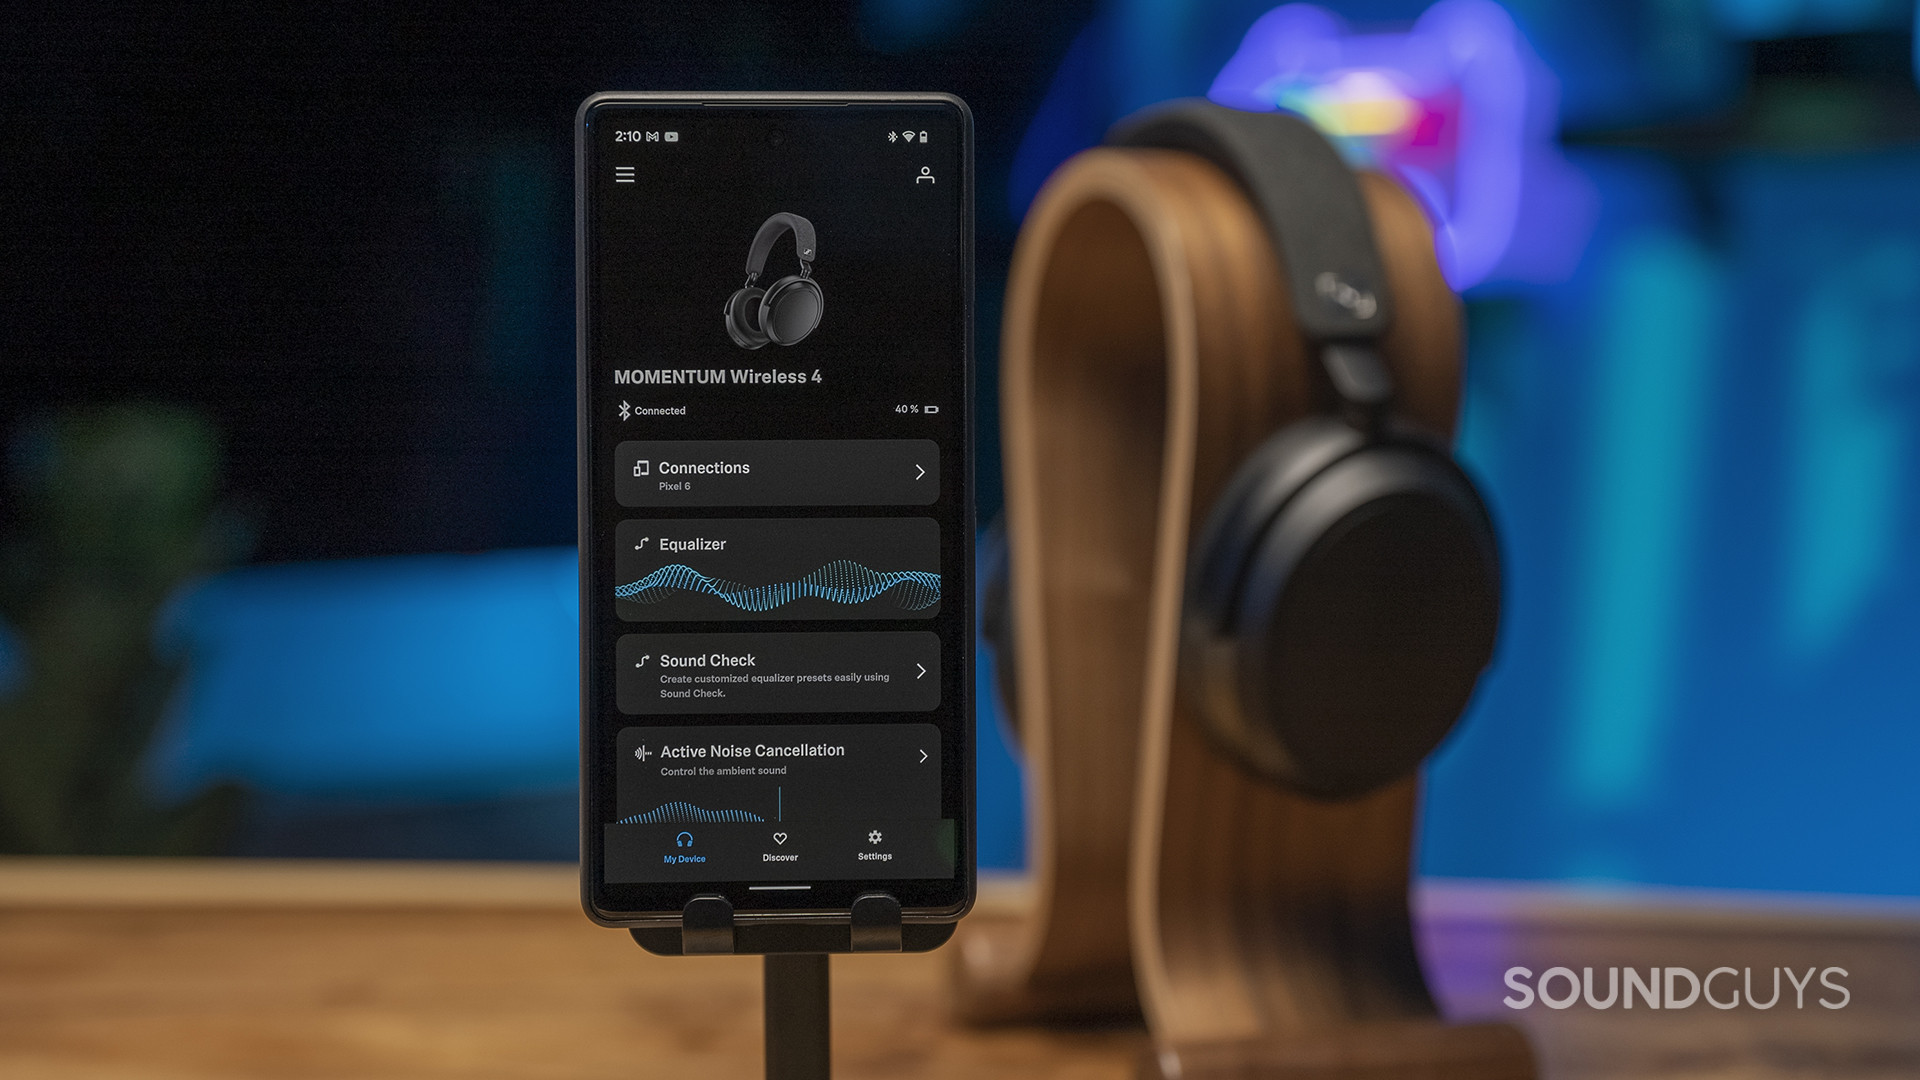 The Sennheiser Momentum 4 Wireless has a lot of features accessible via the app.